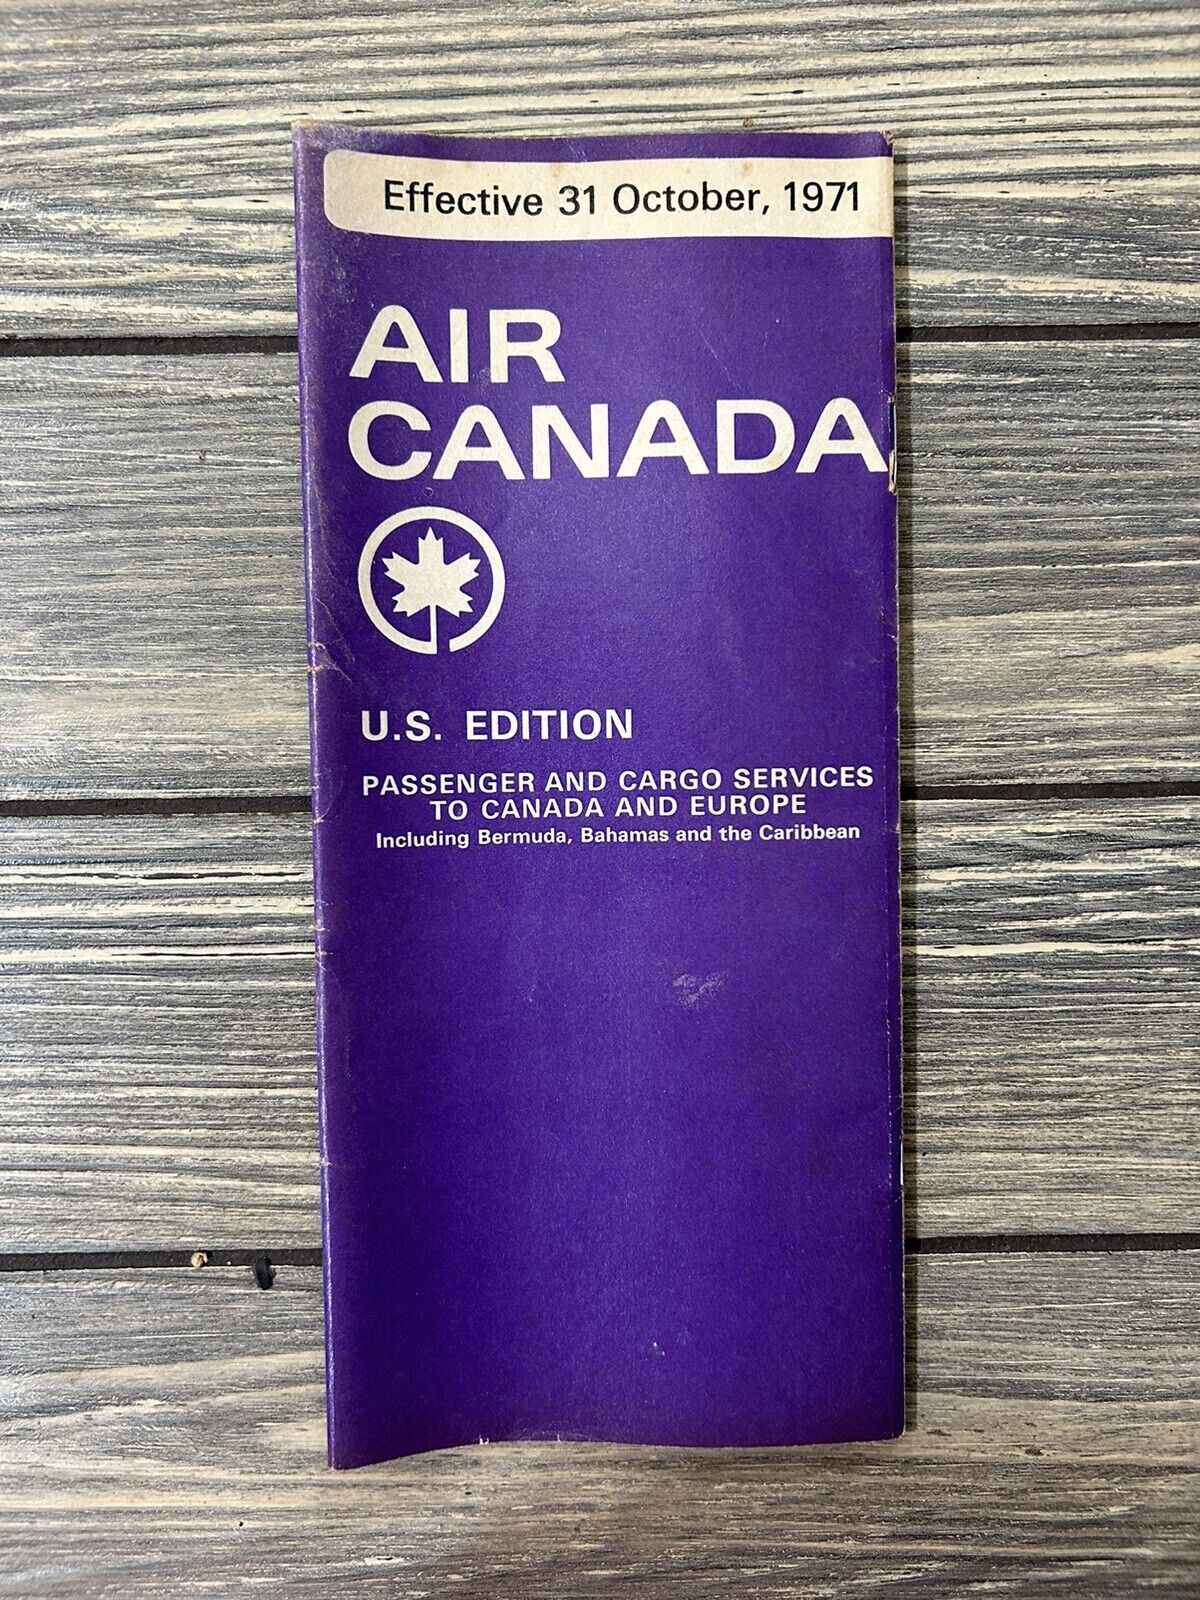 Vintage 31 October 1971 Air Canada Us Edition Passenger And Cargo Services